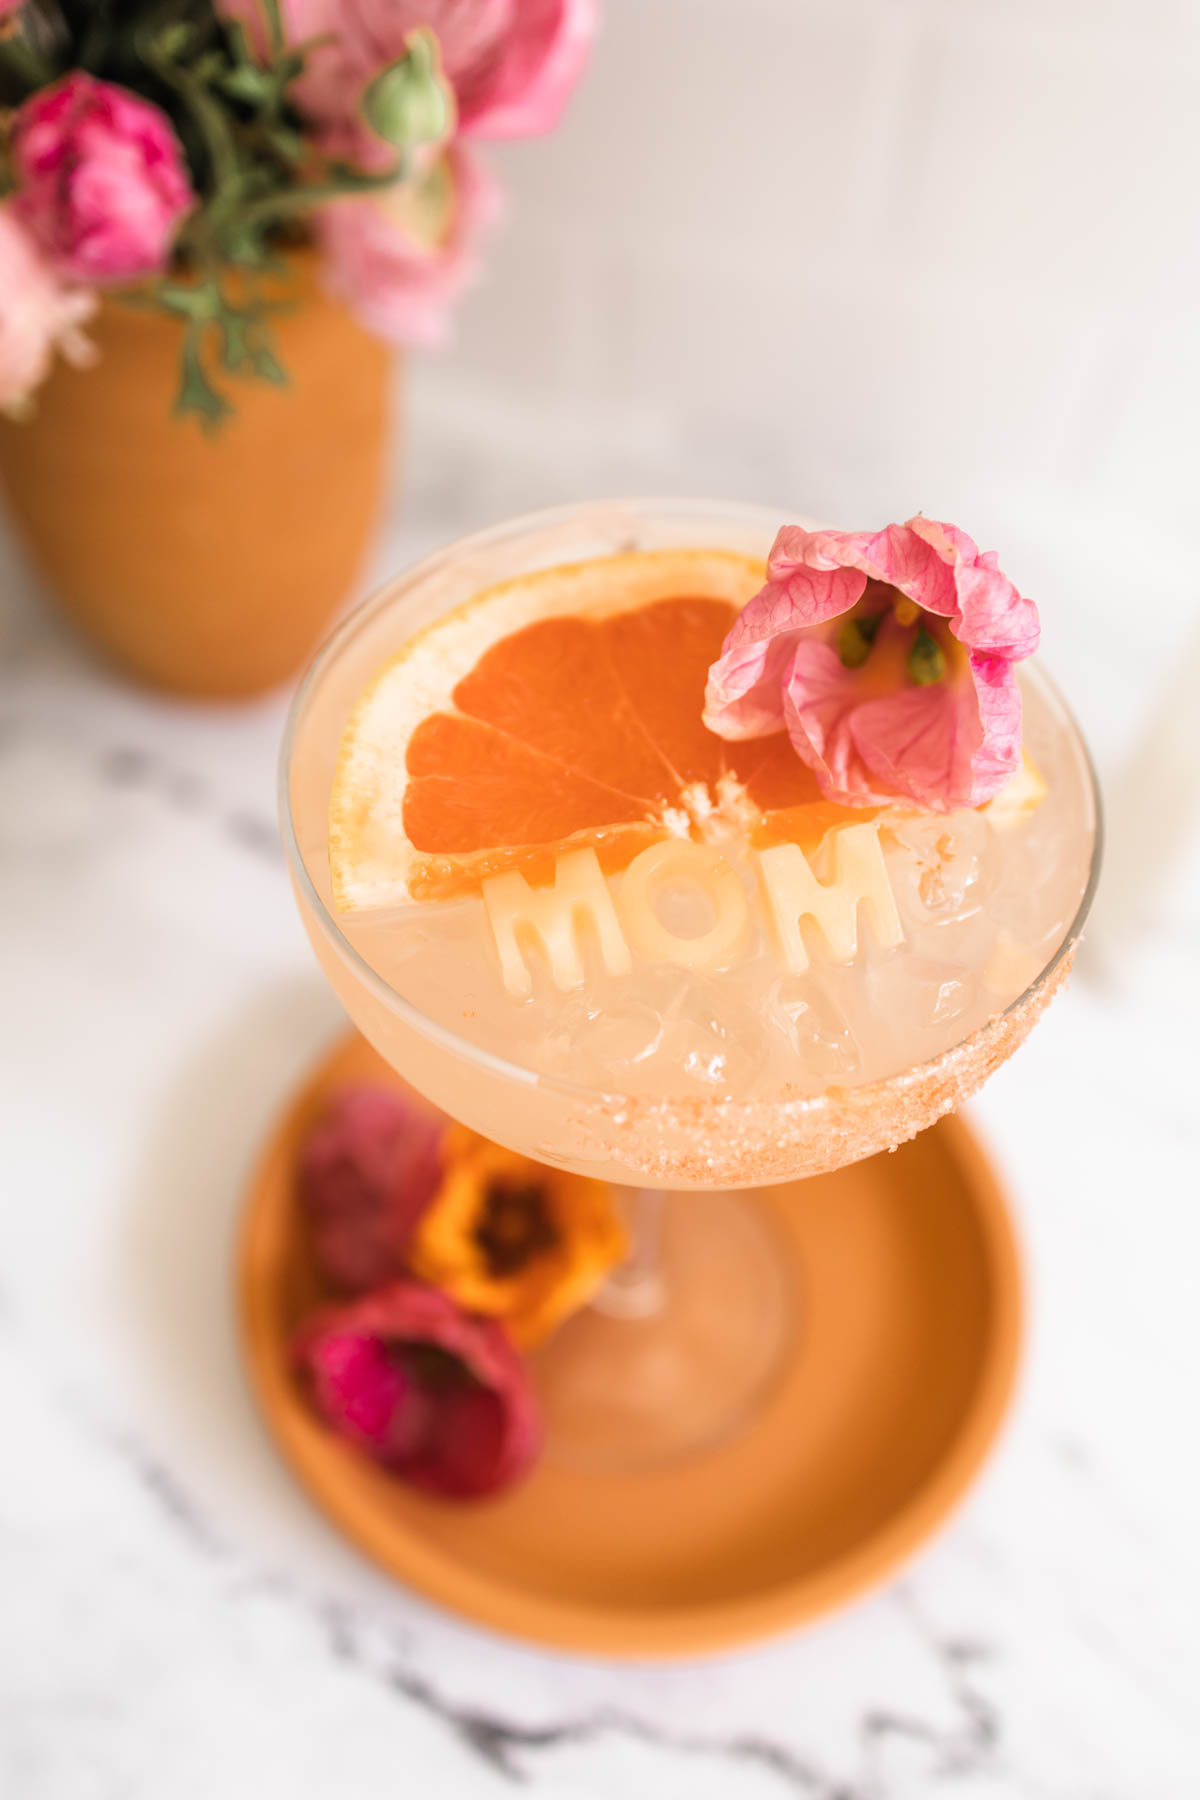 A rosé margarita in a margarita glass garnished with grapefruit wedge, a pink flower, and grapefruit-flavor salt rim as well as ice cubes that say "mom".